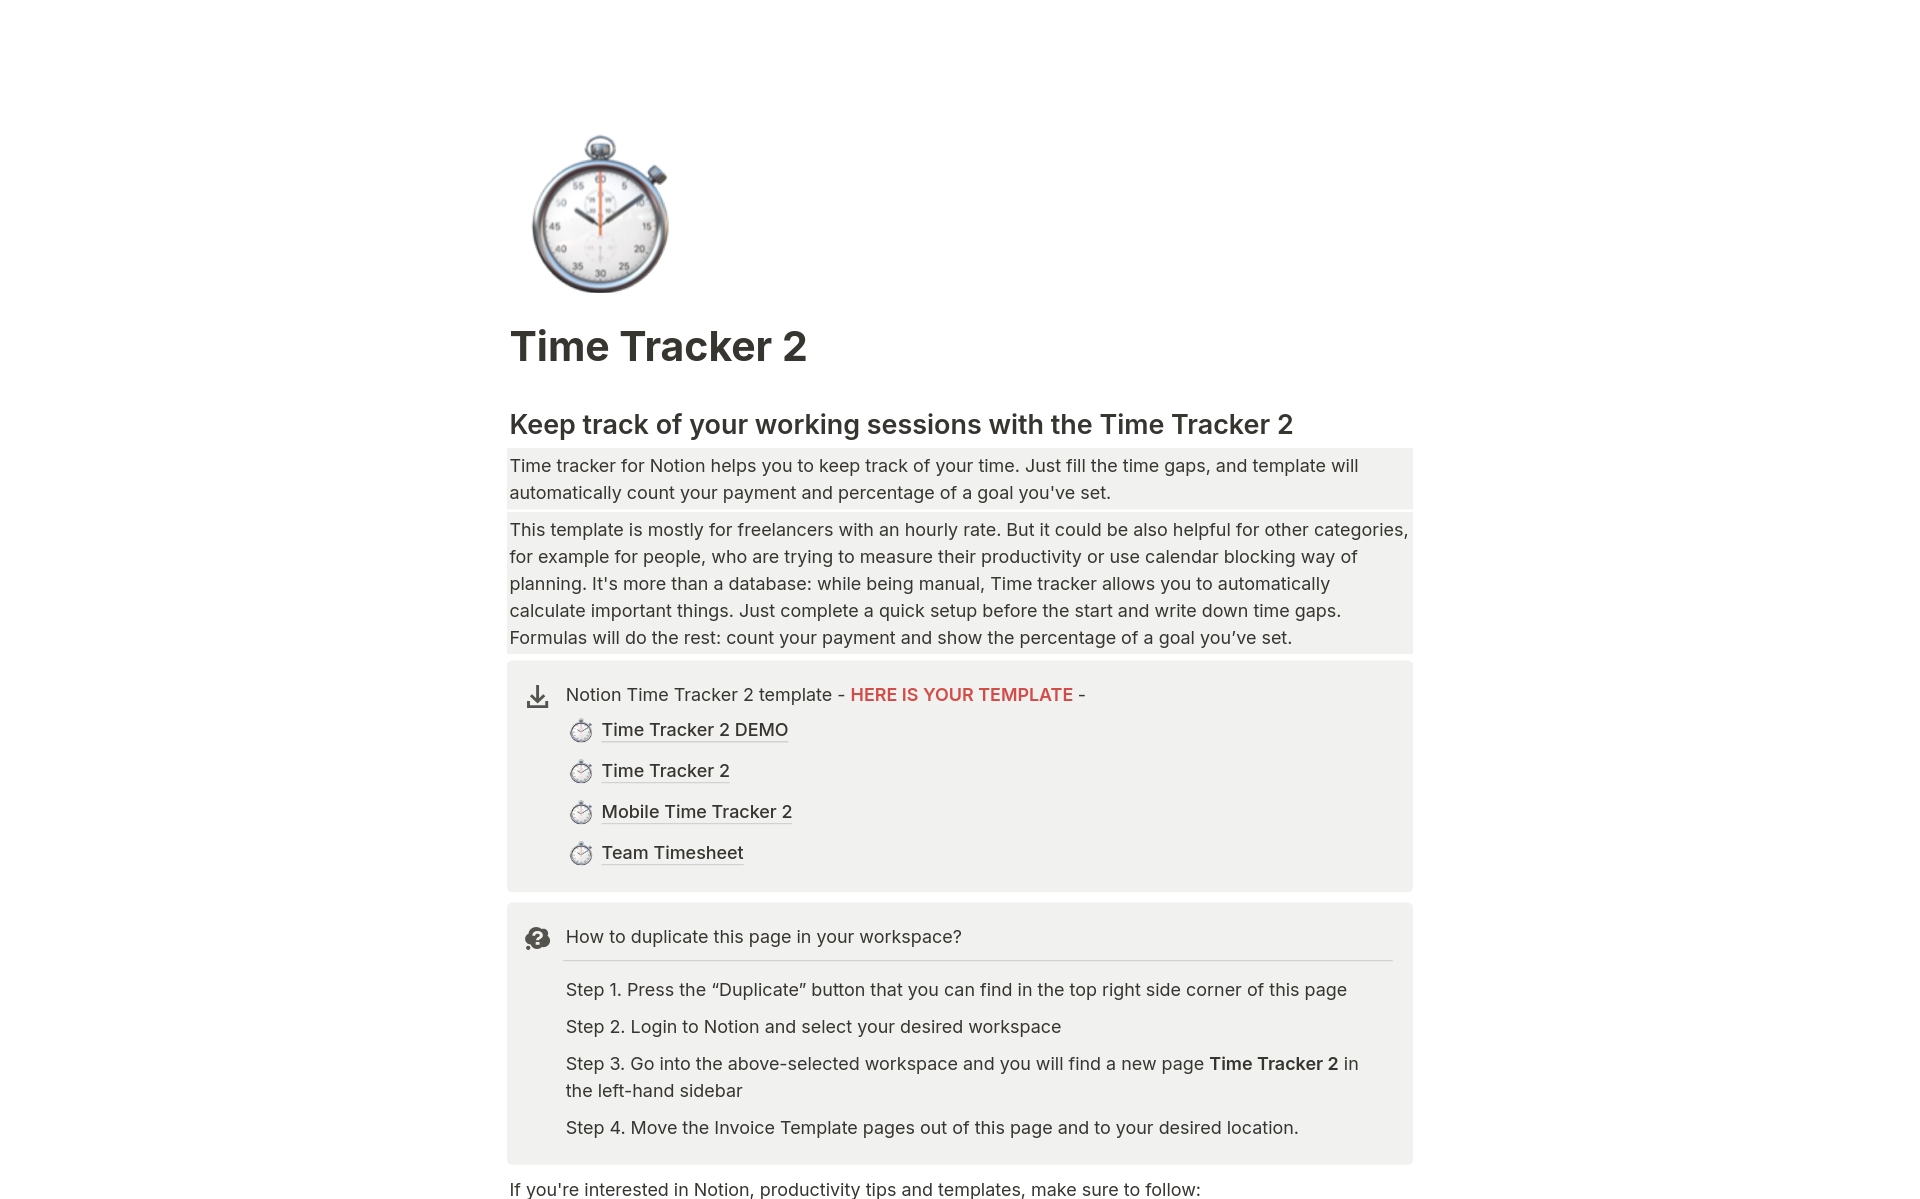 Time Tracker 2 is a powerful Notion template that helps you track your time and productivity. With TimeTracker, you can easily create projects, add tasks, and track the amount of time you spend on each task.